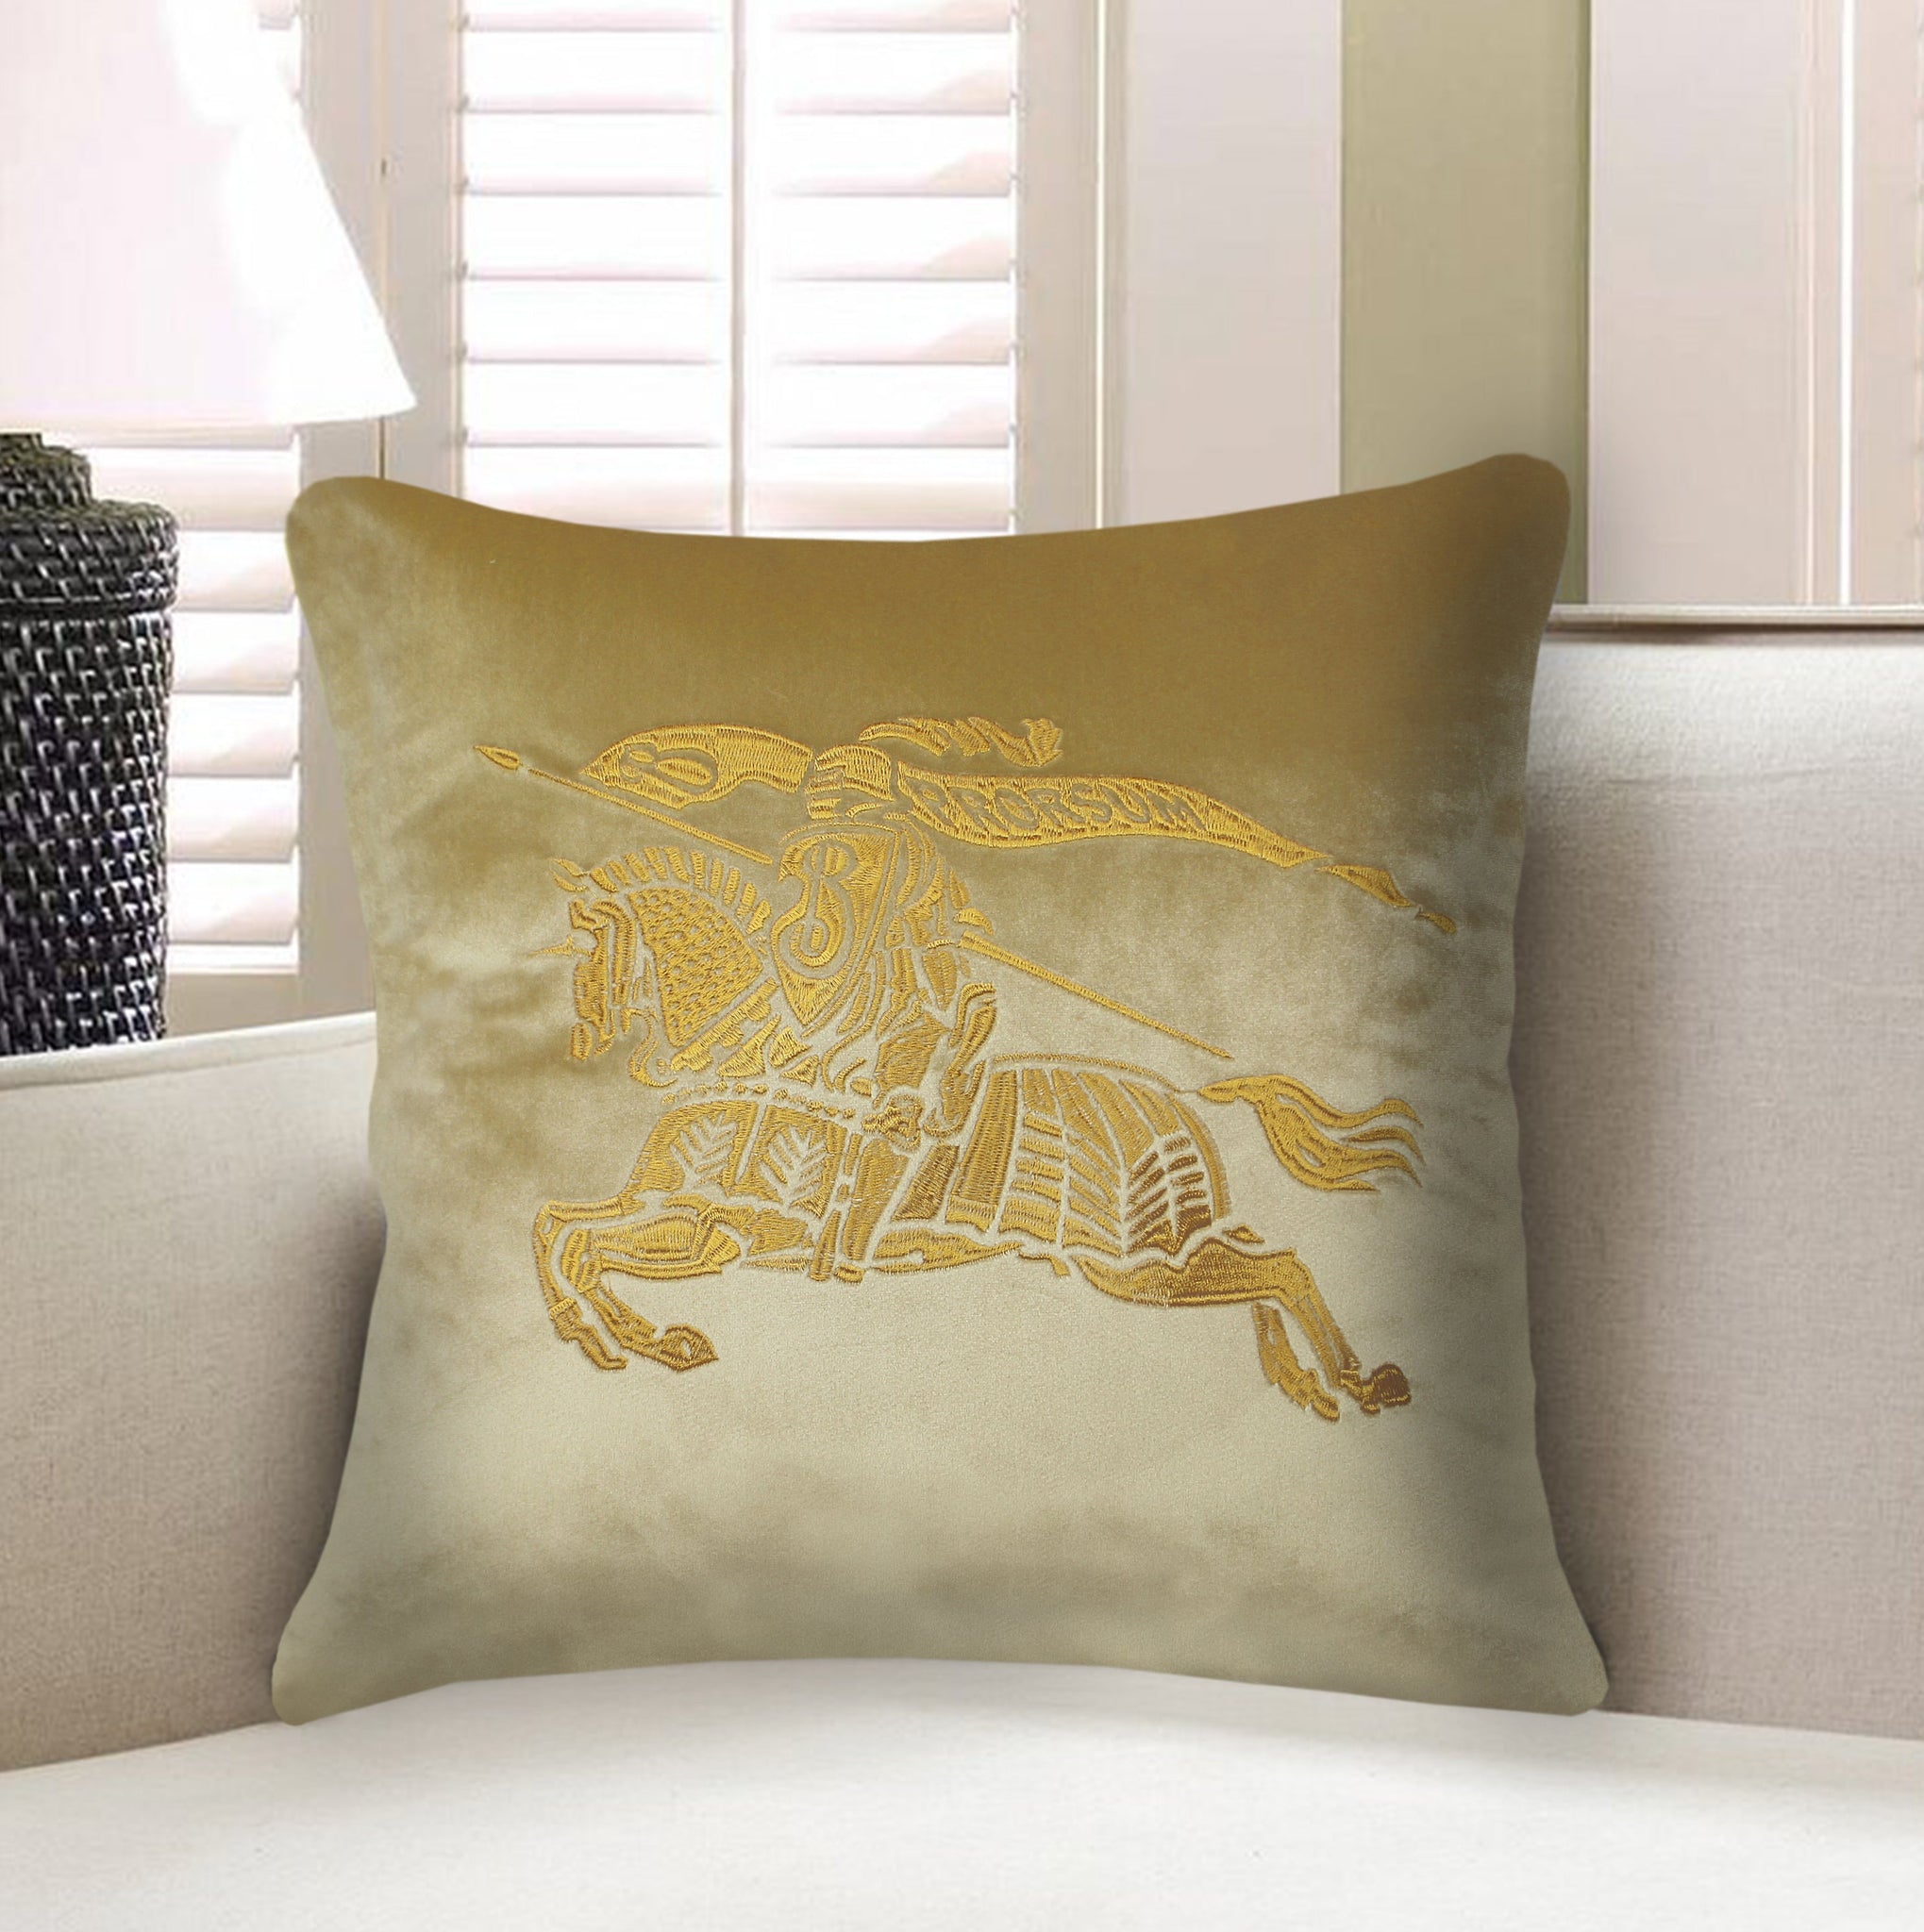 Gold Pillow Cover Velvet Decorative Cushion Cover Embroidery  Iconic Horse Throw Pillow Pillow Case for Sofa Chair Bedroom Living Room 45x45 cm 18x18 Inches